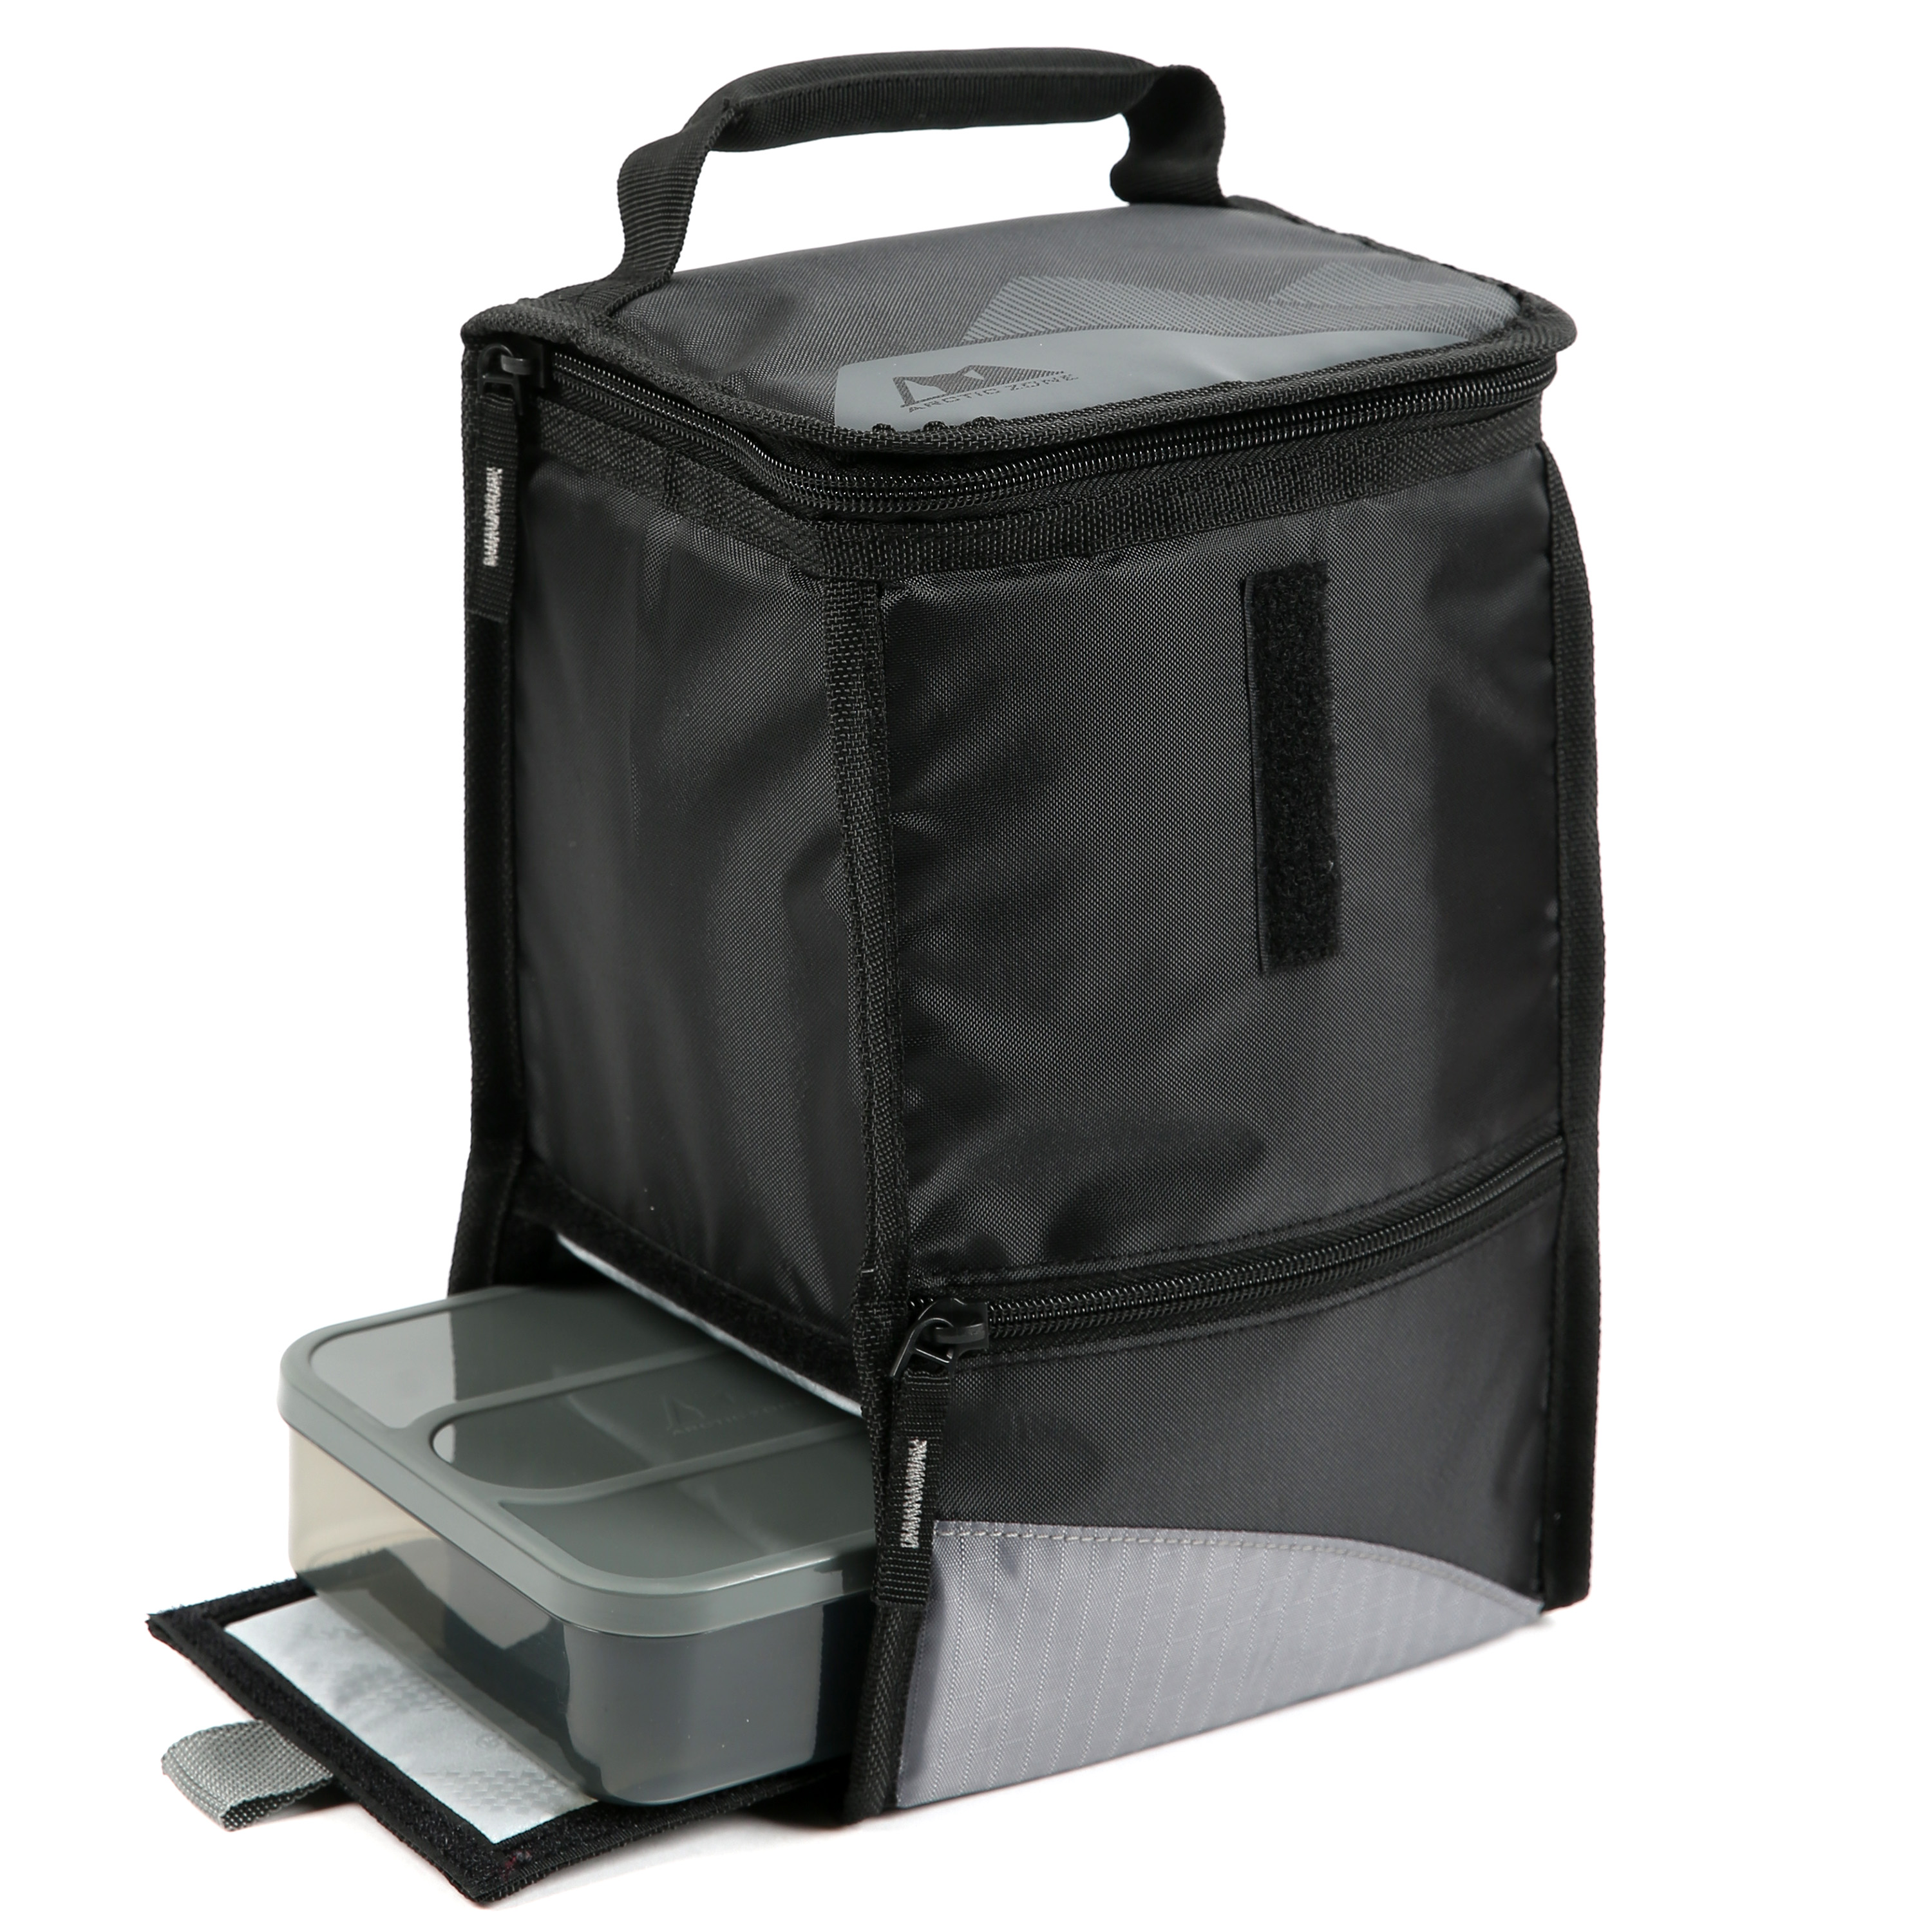 Arctic Zone Hi-Top Power Pack Lunch Pack with Food Container, Black - image 1 of 11